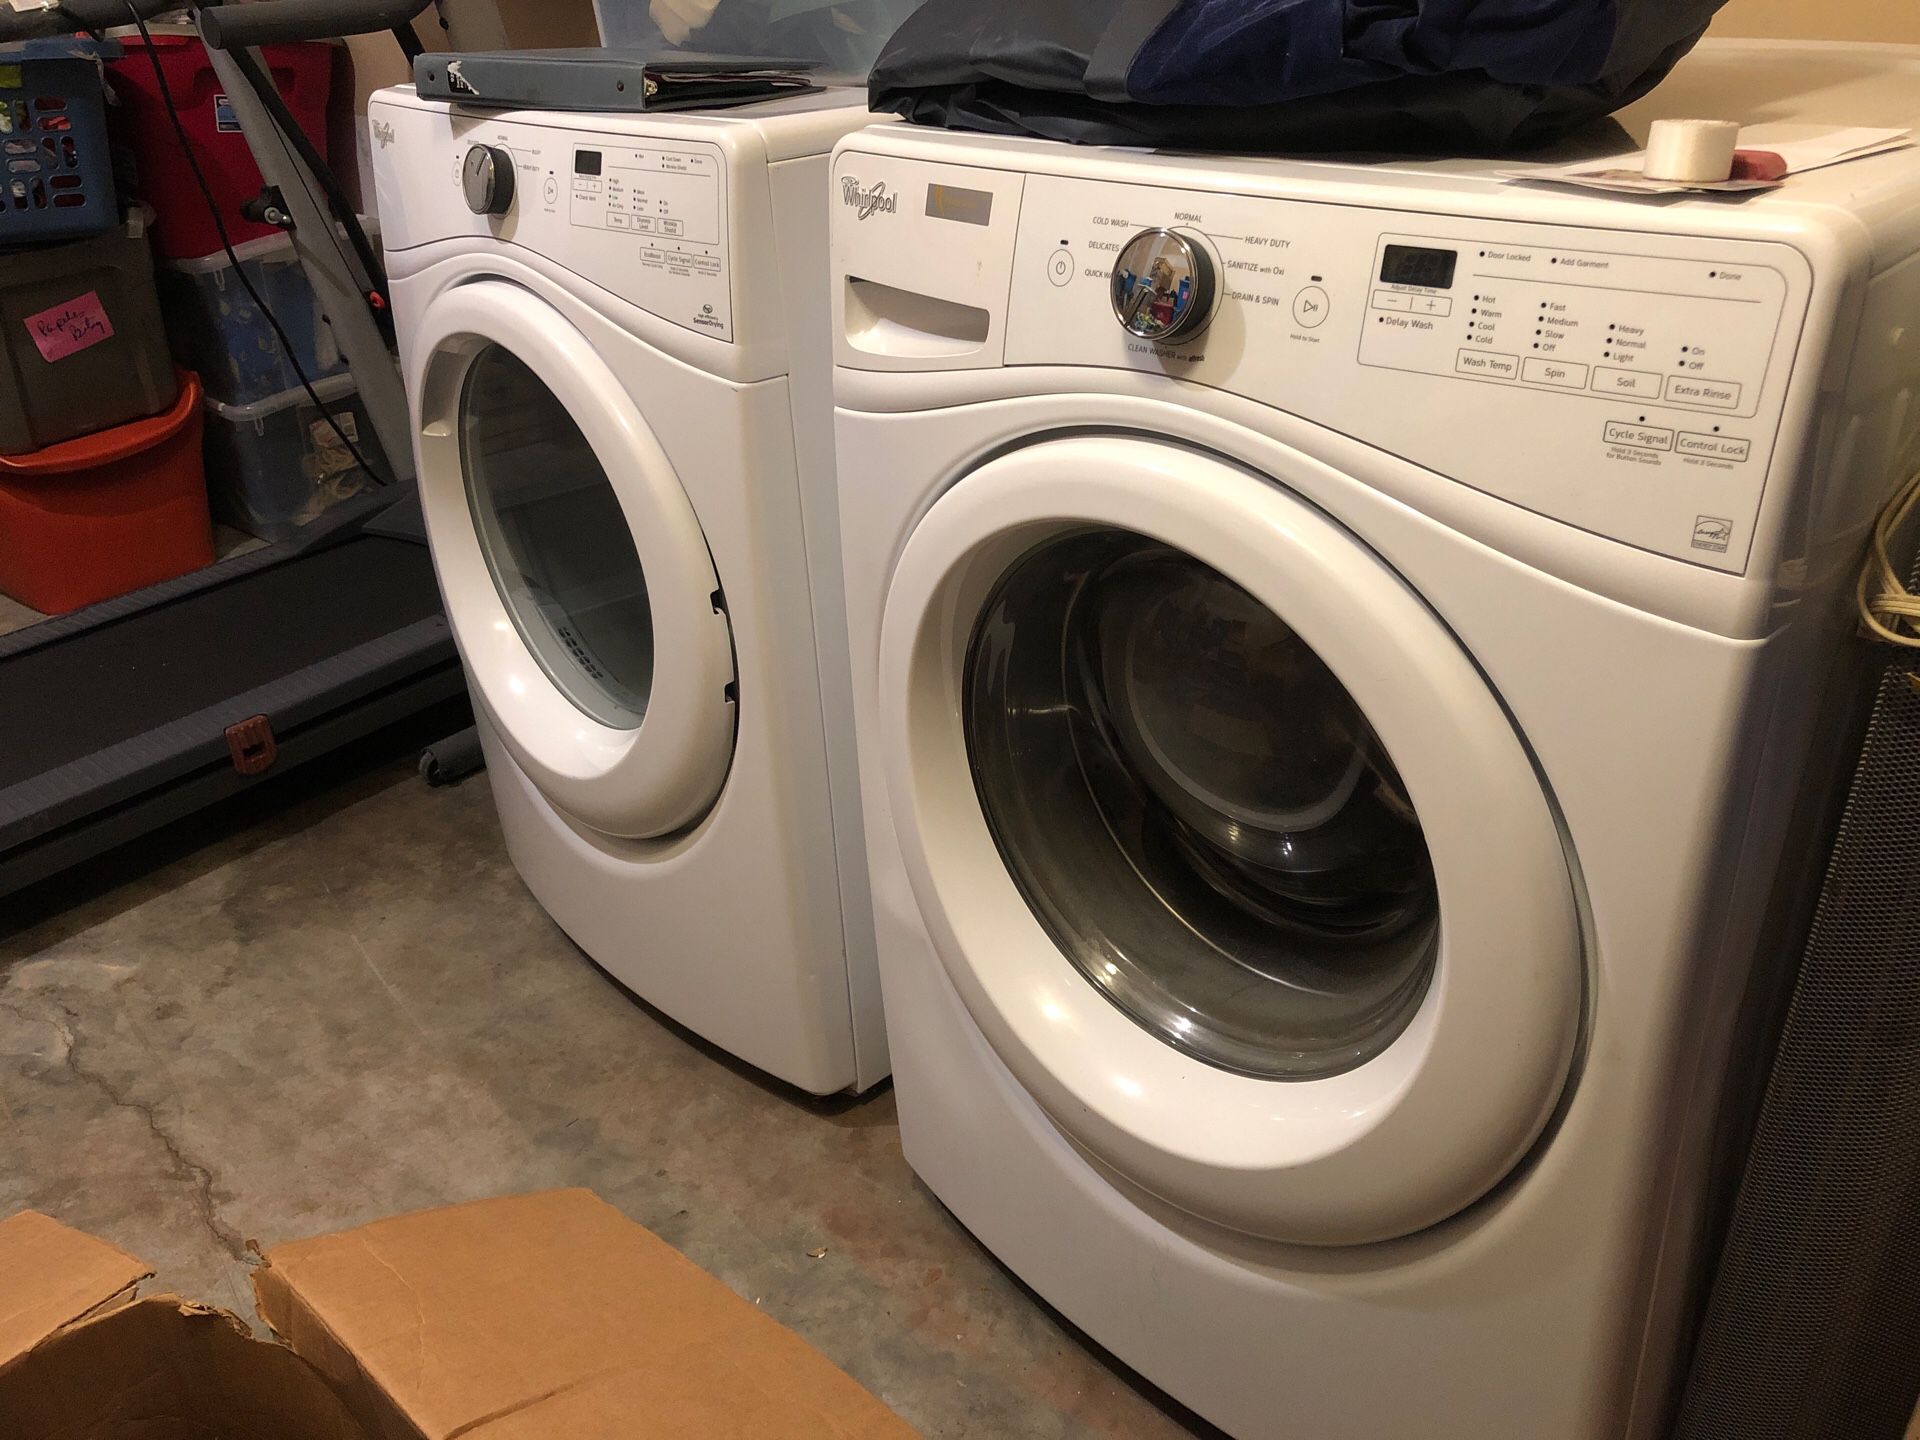 Washer and dryer (whirlpool) front loader